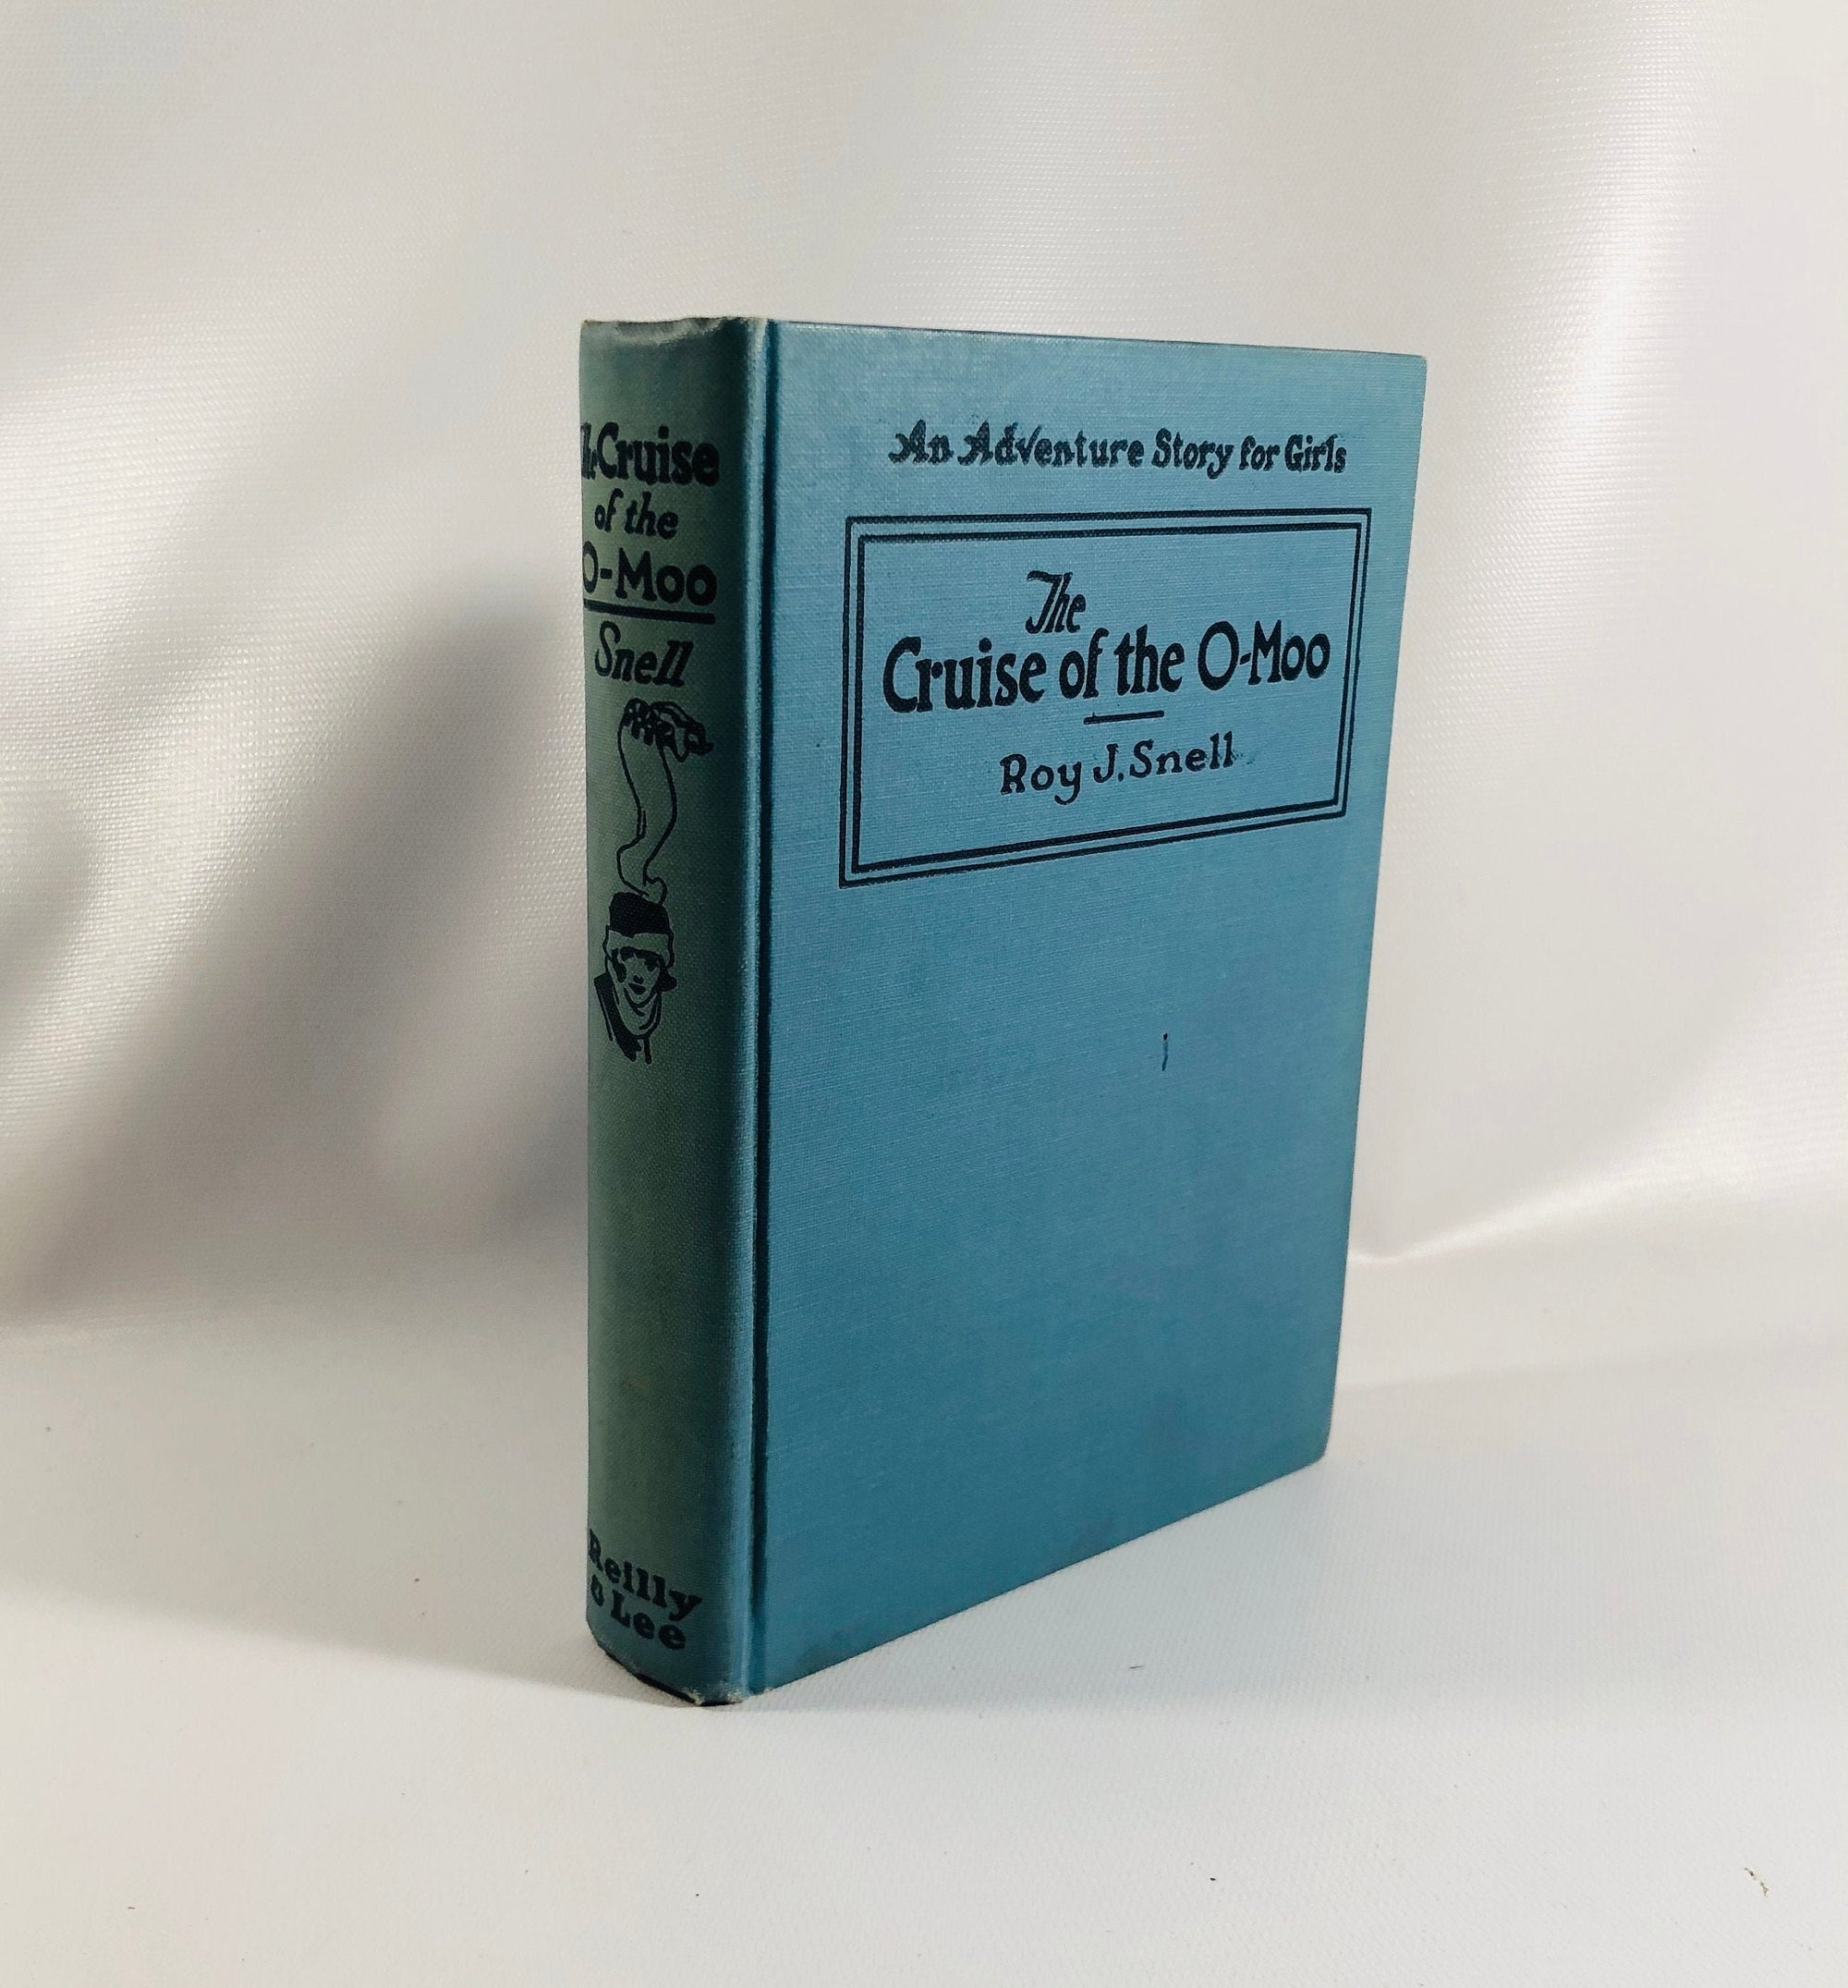 The Cruise of the O-Moo by Roy J. Snell  1922 An Adventure Story for Girls .Vintage BookVintage Book